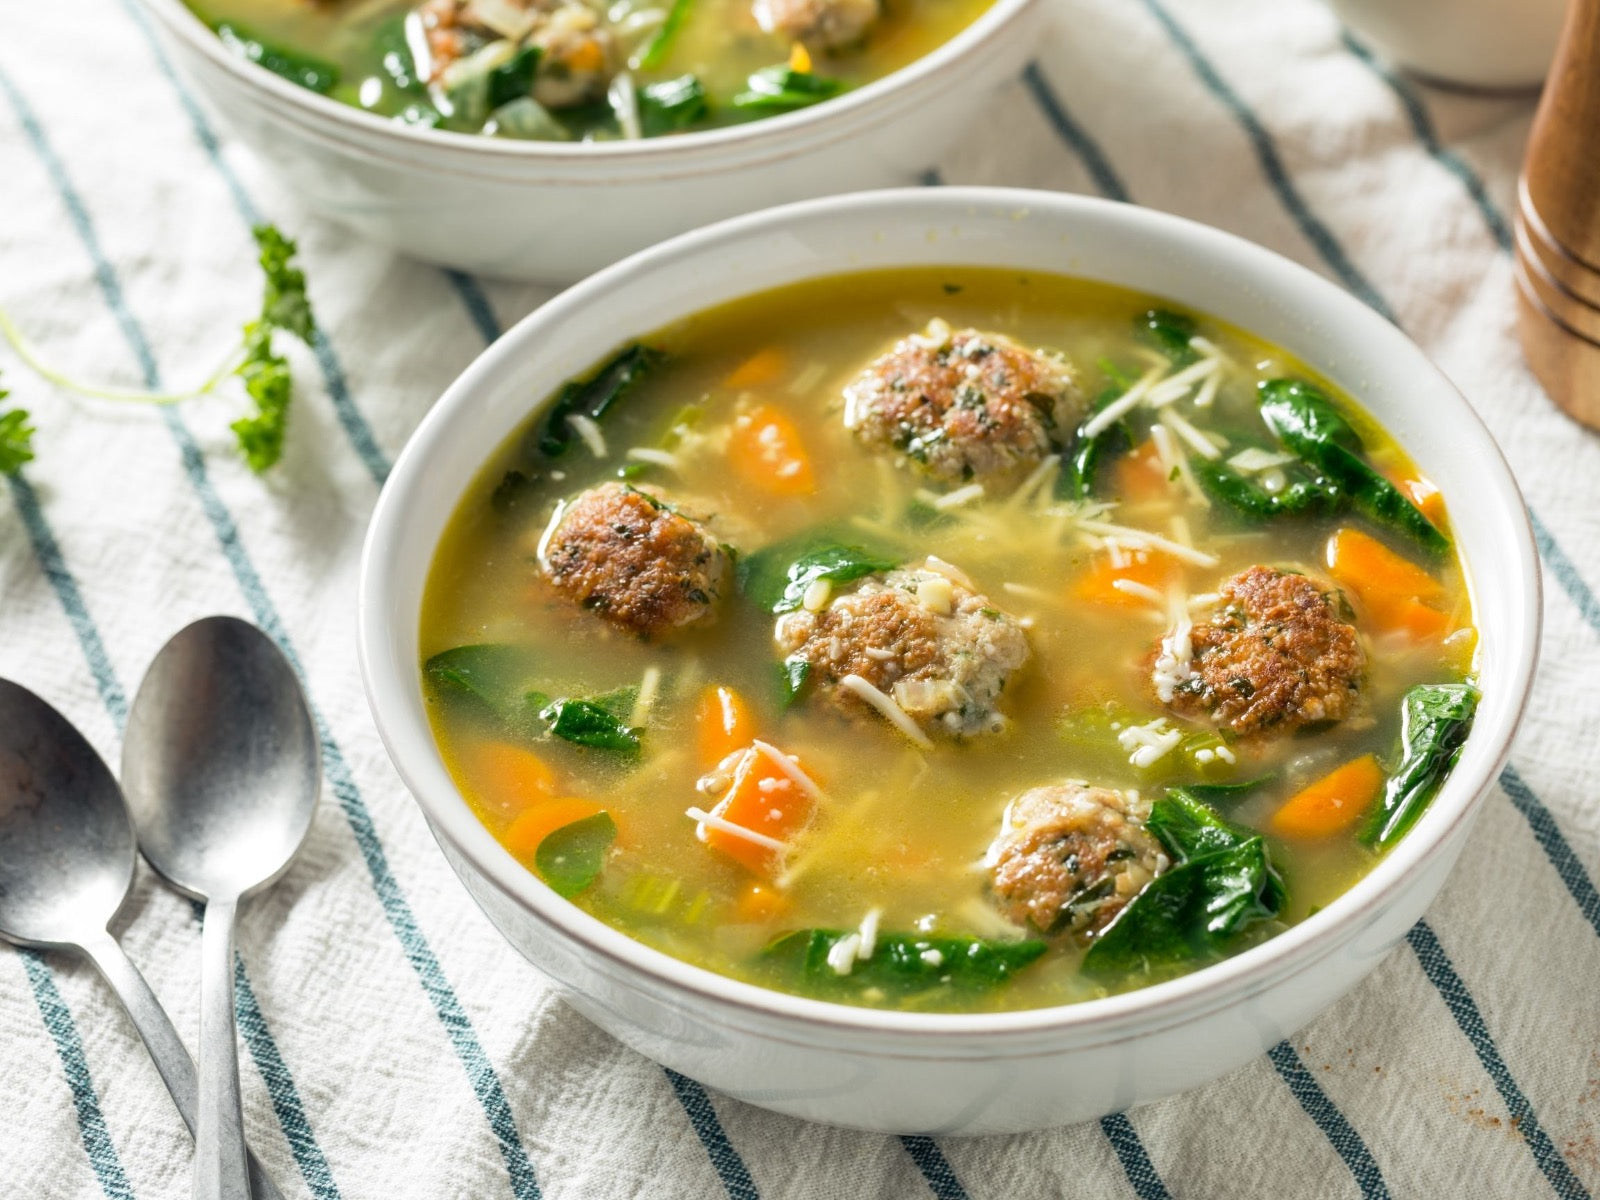 Italian Wedding Soup With Bison And Wild Boar Meatballs - Beck & Bulow